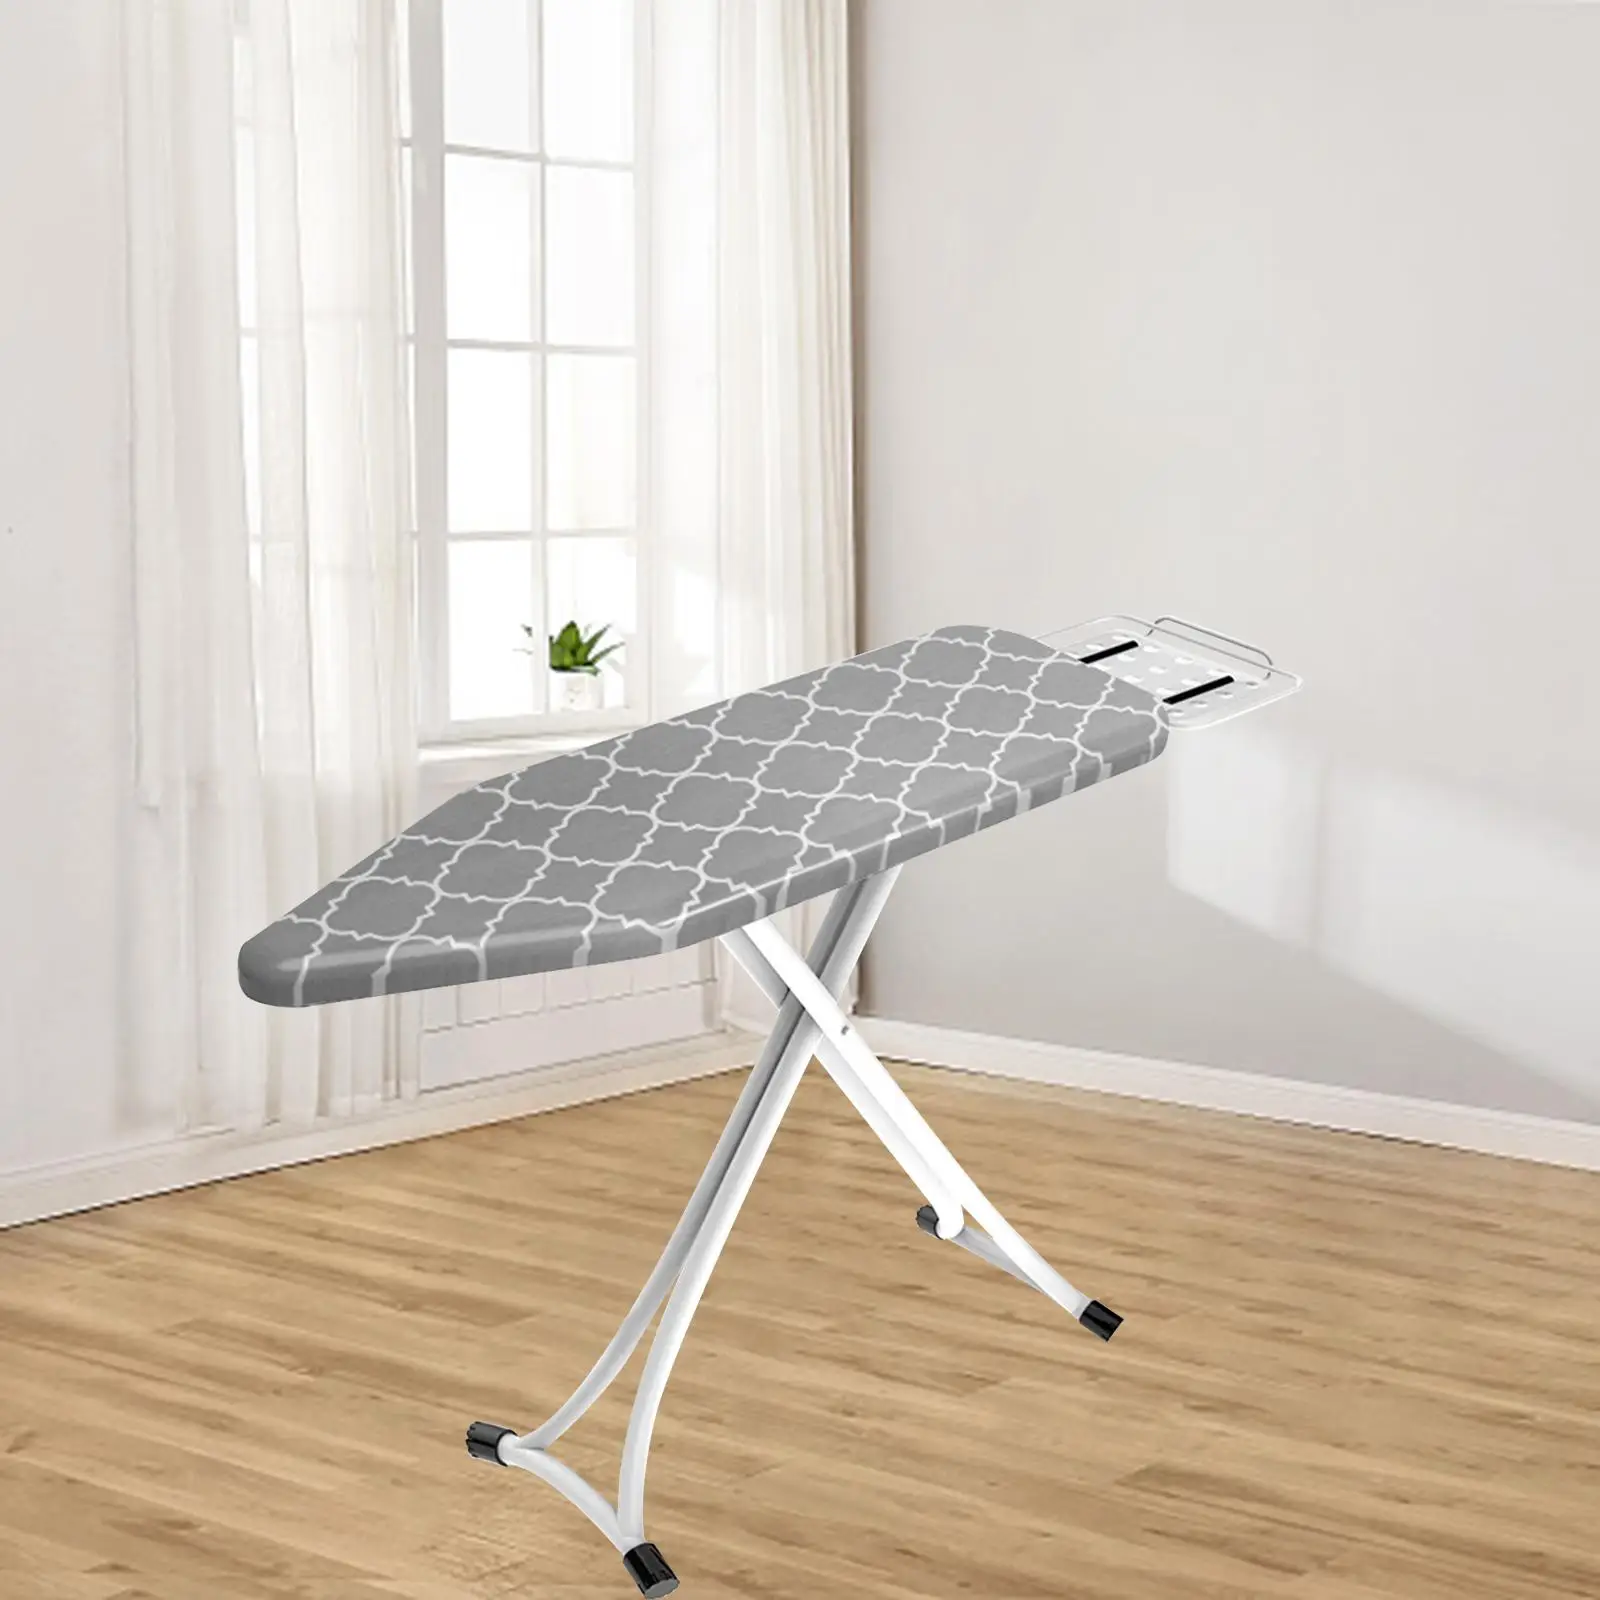 Elastic Ironing Board Padded Cover Resists Scorching Stain Resistant 120Cmx41cm